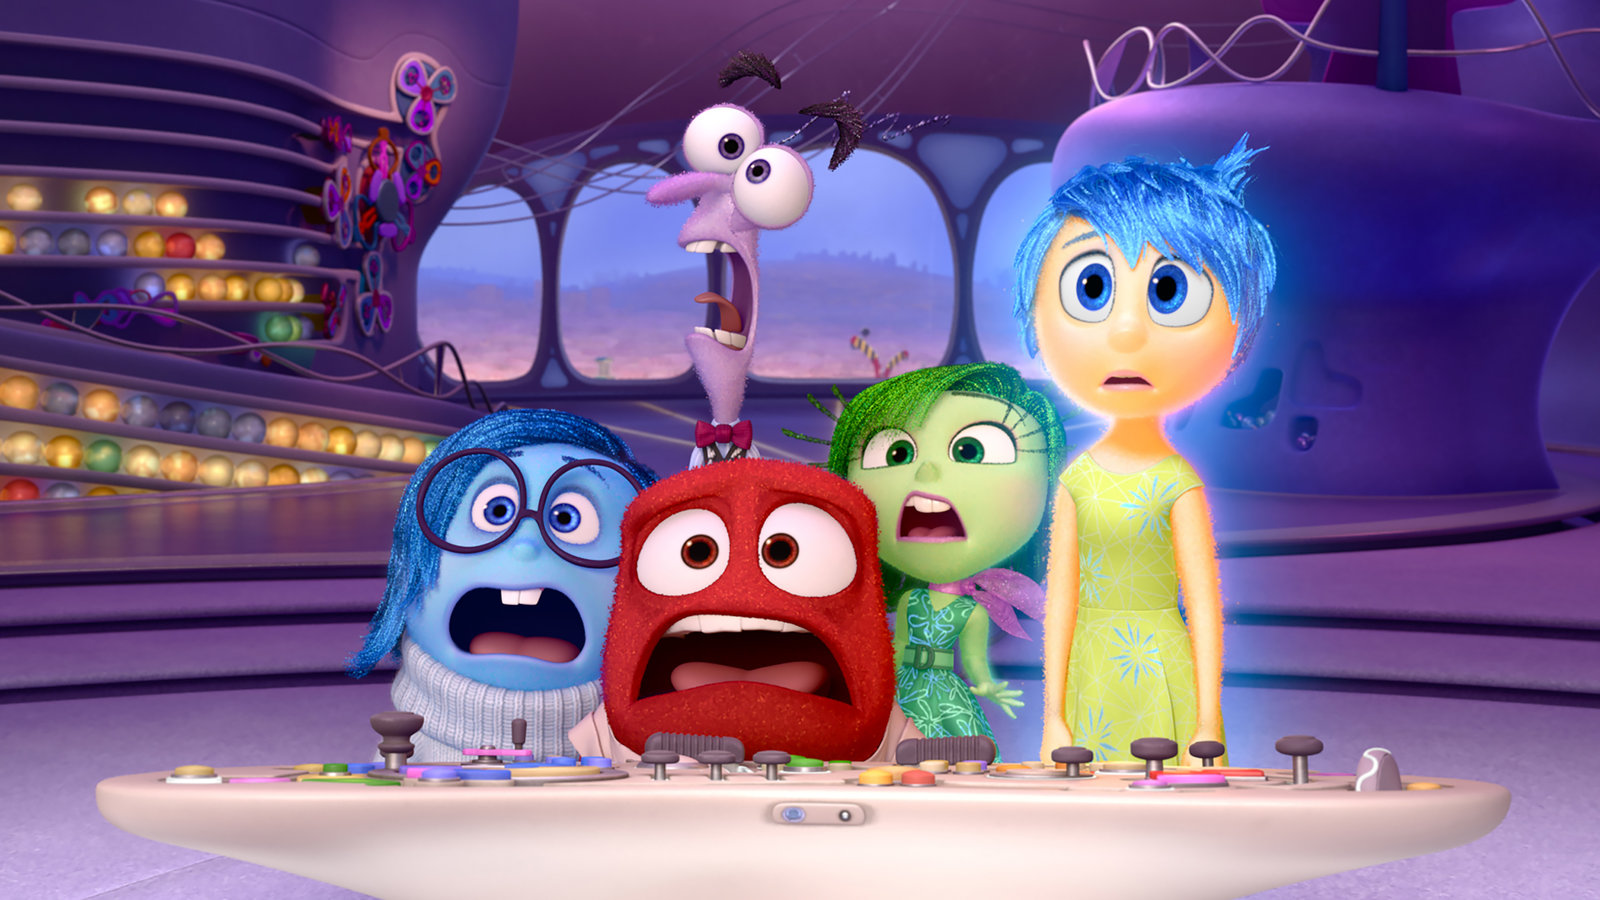 5. 'Inside Out' (2015)